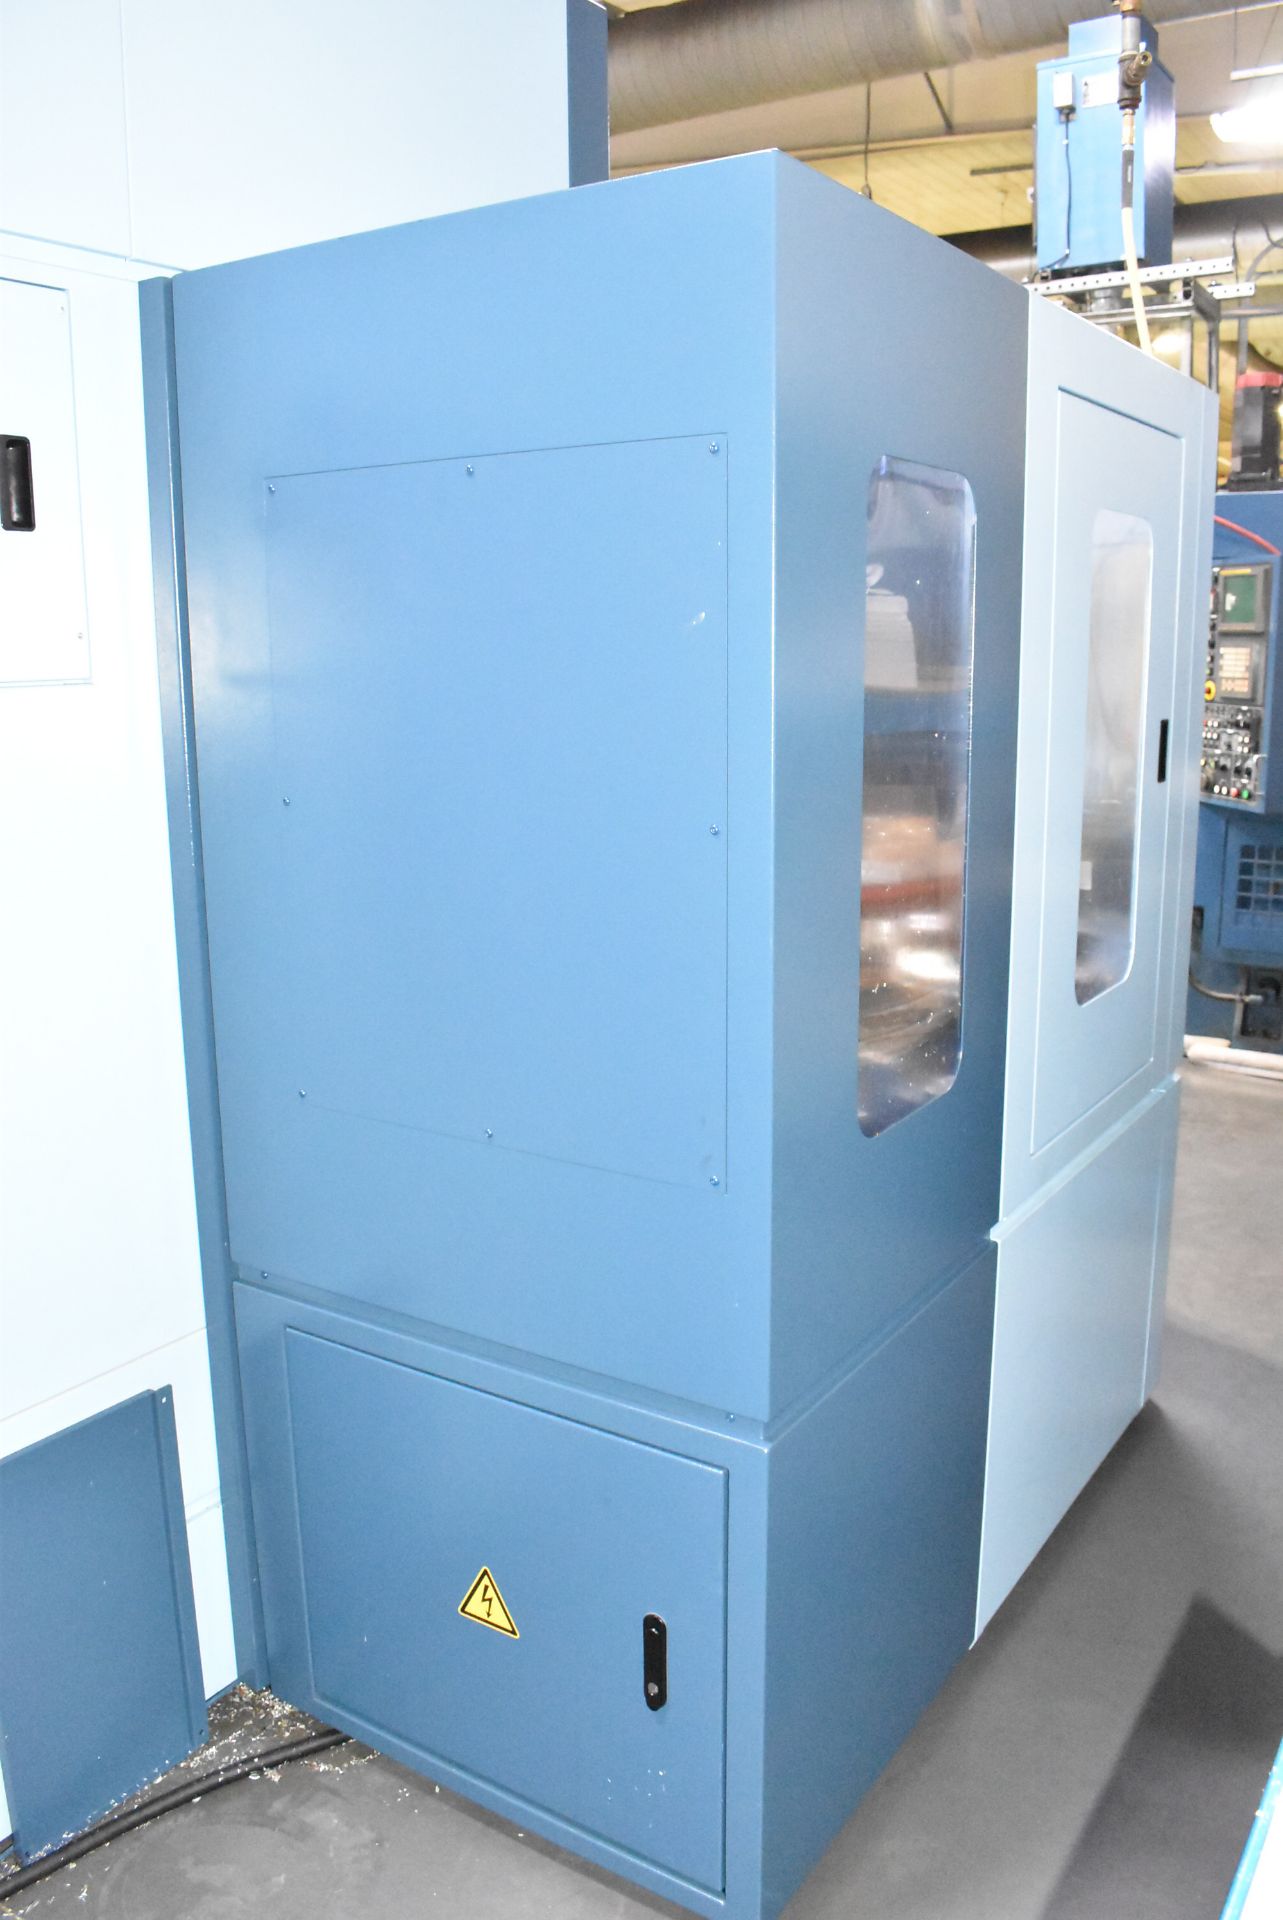 MATSUURA (2019) MX-520 PC4 MULTI-PALLET FULL 5-AXIS HIGH-SPEED CNC VERTICAL MACHINING CENTER WITH - Image 9 of 12